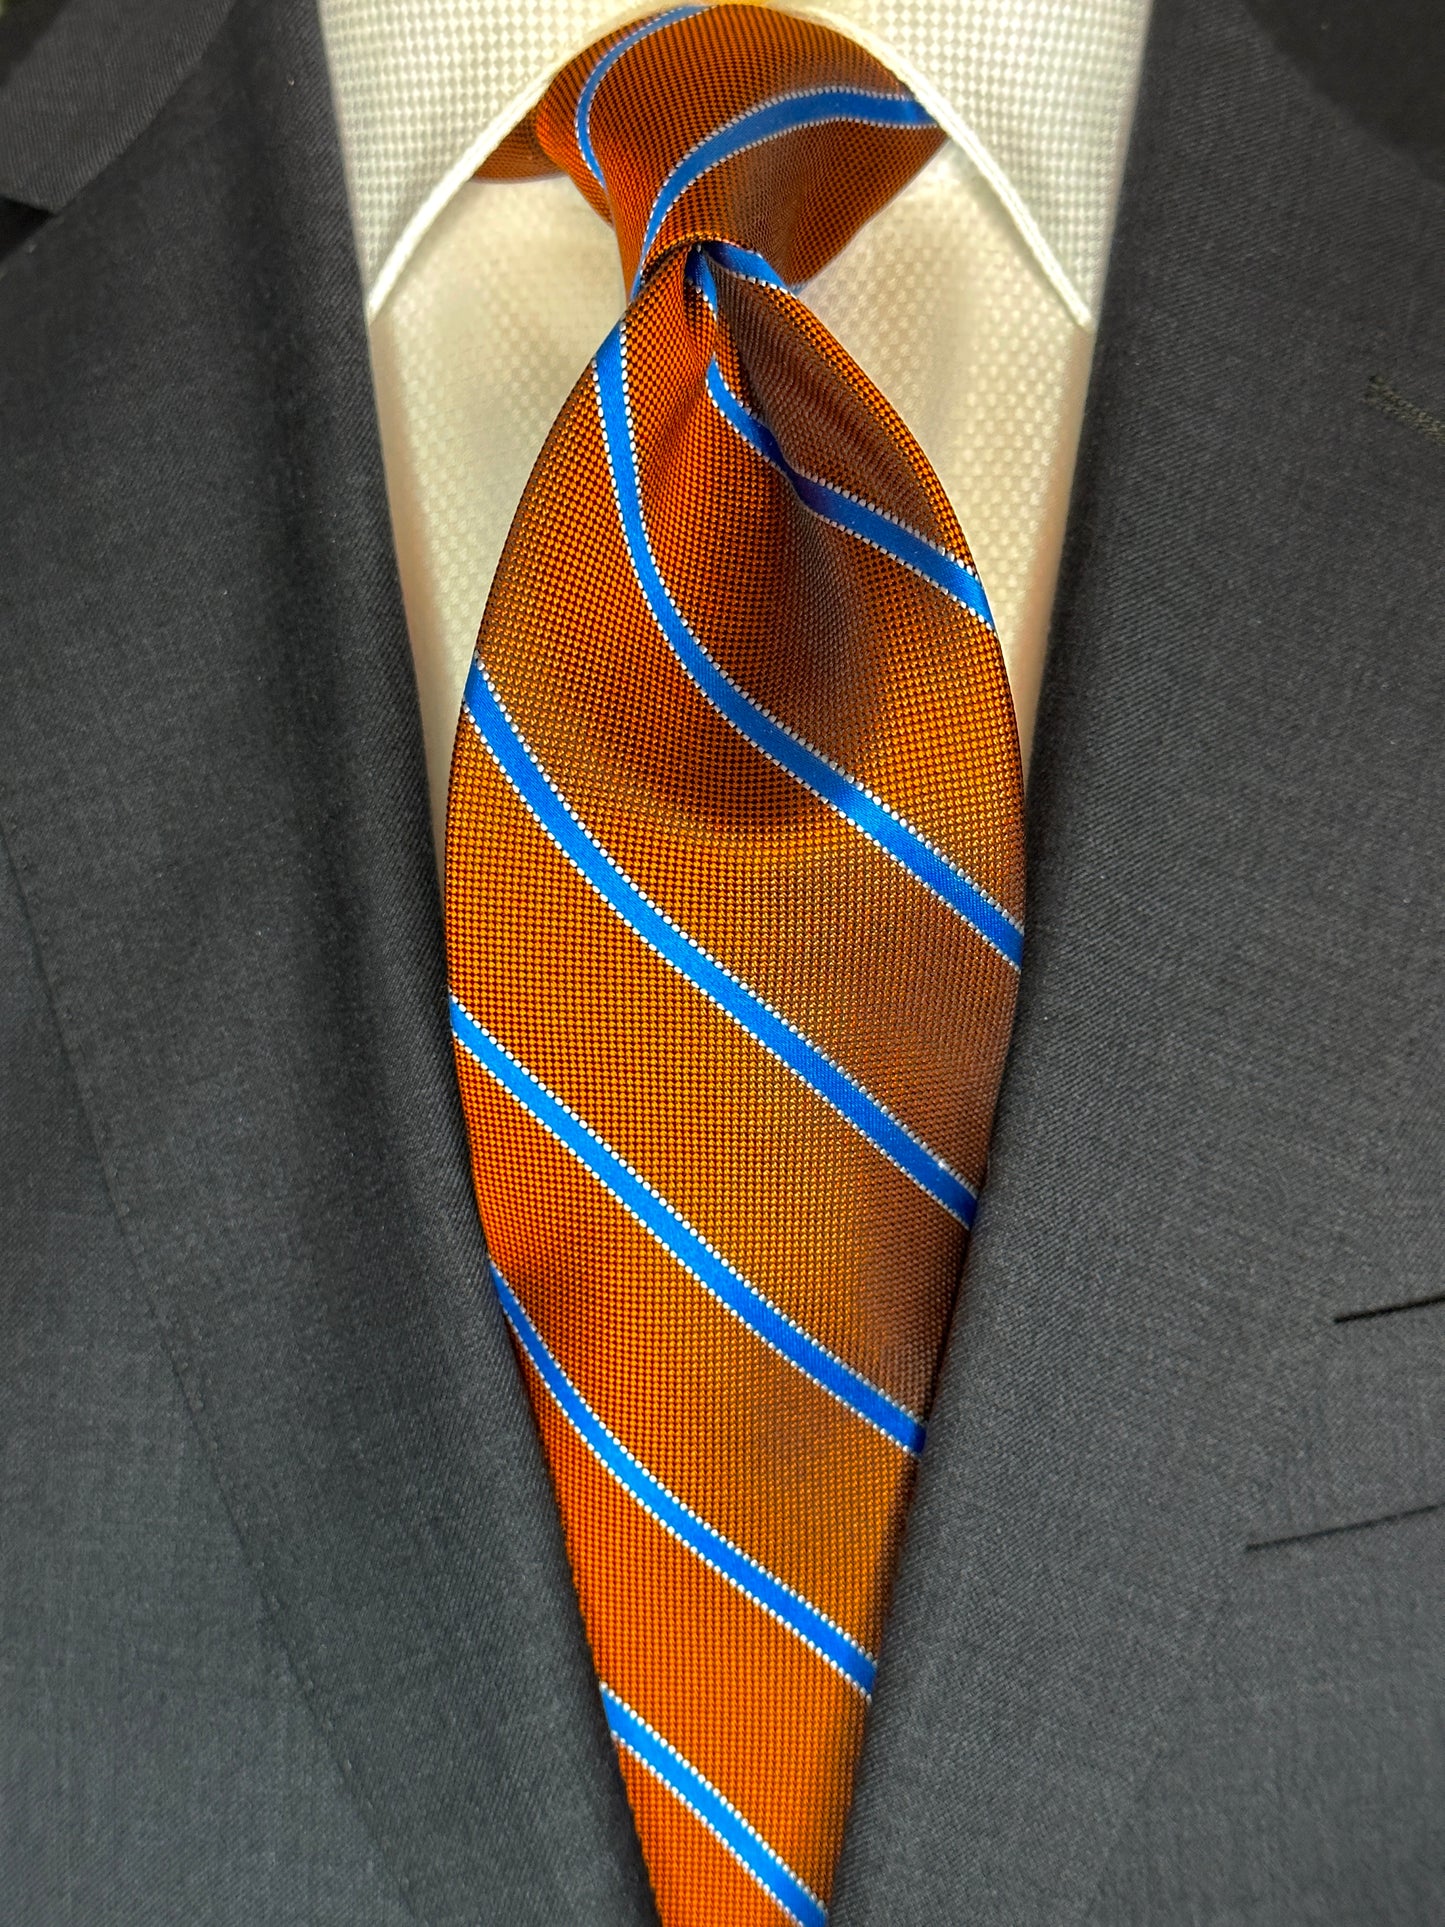 This beautiful burnt orange woven silk necktie is a stunning rich color with a baby blue stripe running through it. A perfect tie for any season and matching with a multitude of suit colors and patterns, this is a very versatile tie. In Italy, the mini plaid shirt with striped tie is a sophisticated ensemble. 